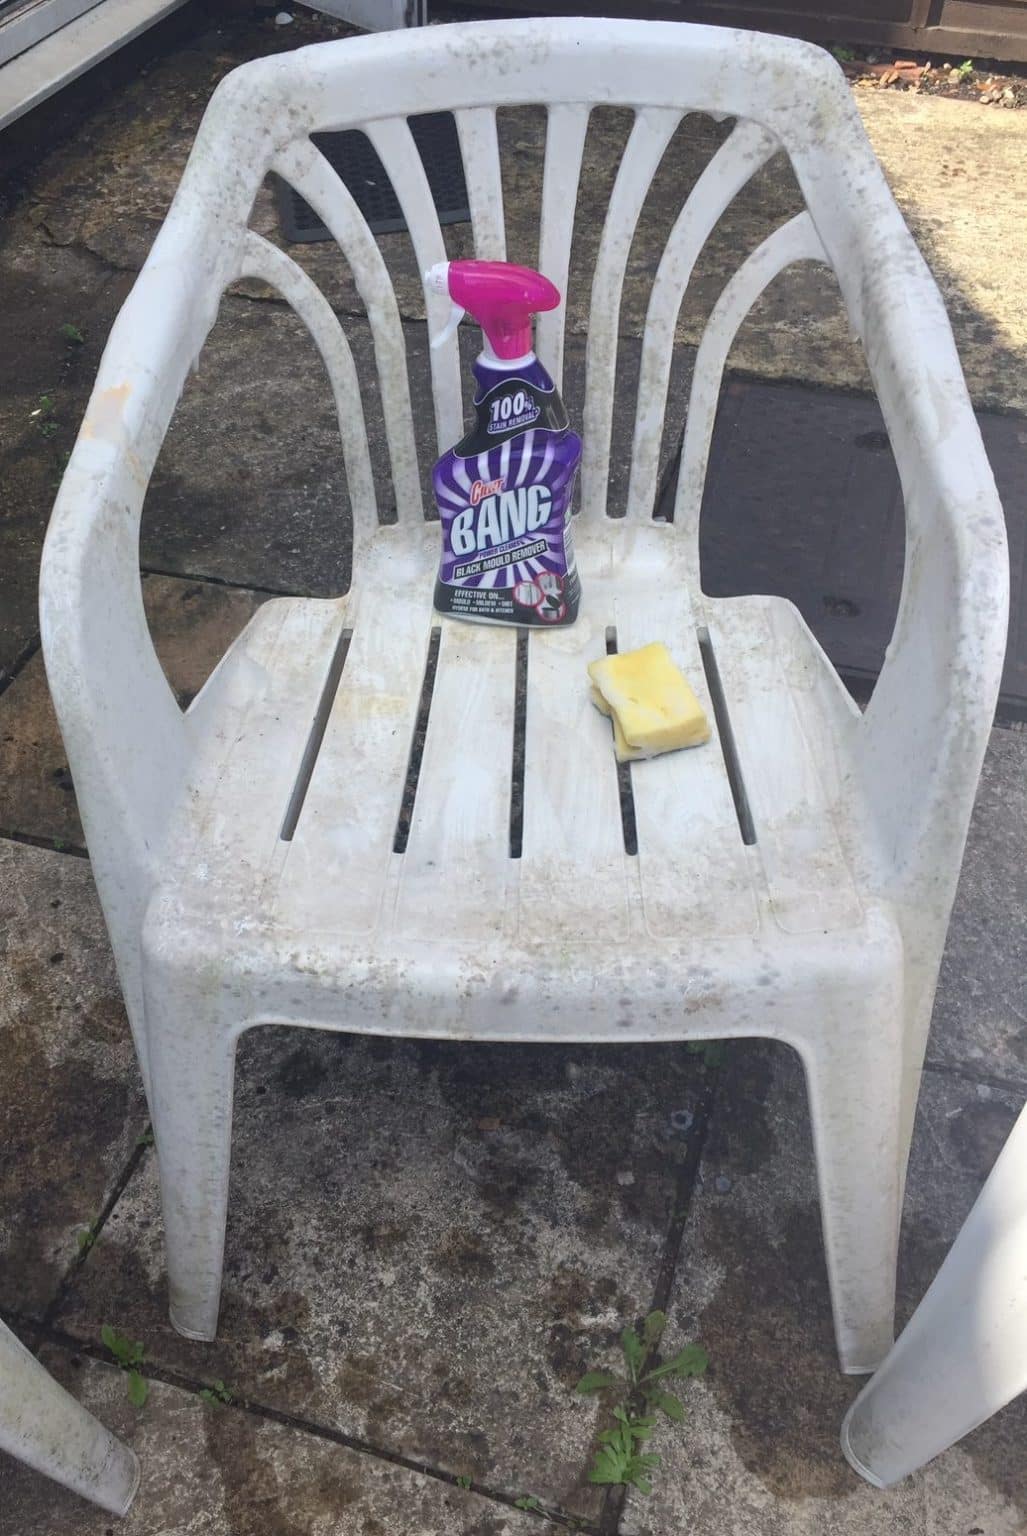 How To Clean White Plastic Garden Chairs